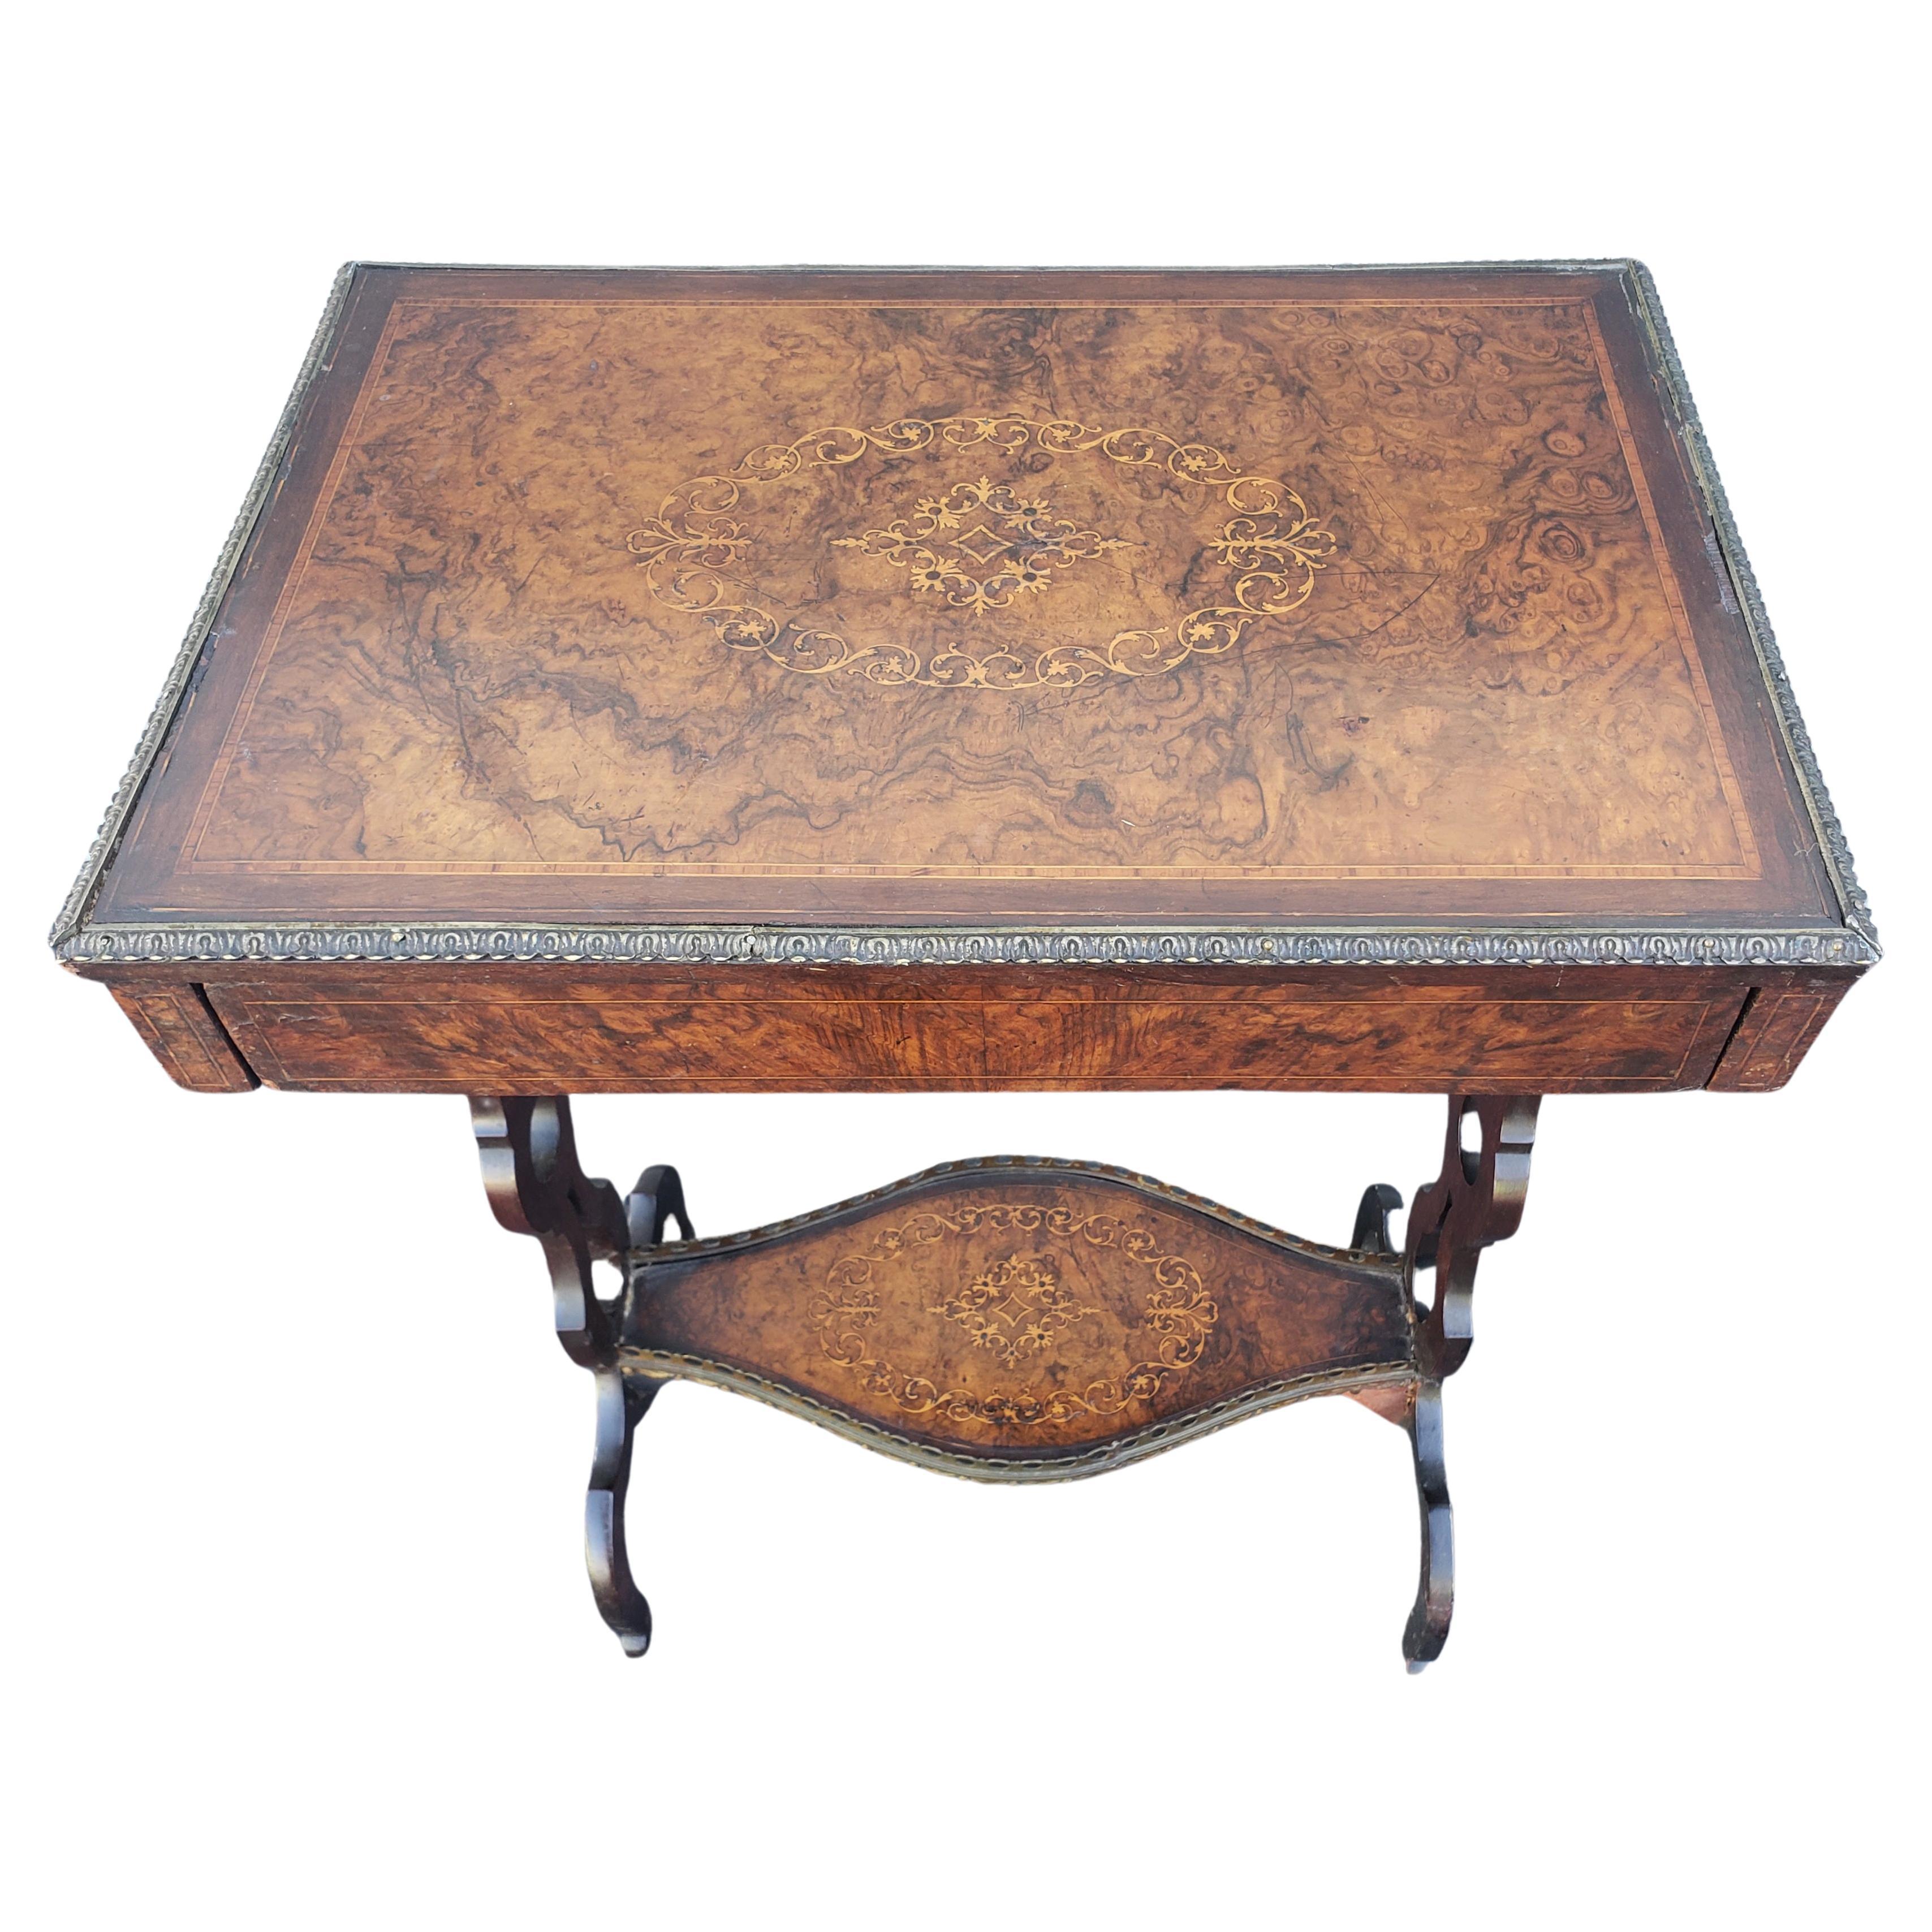 We are pleased to offer this gorgeous Antique English Sheraton tea table, side table, from the 1840s. This table is made of walnut wood, walnut veneer & banded Satinwood, featuring ae rectangular top and one dovetailed large drawer very clean and